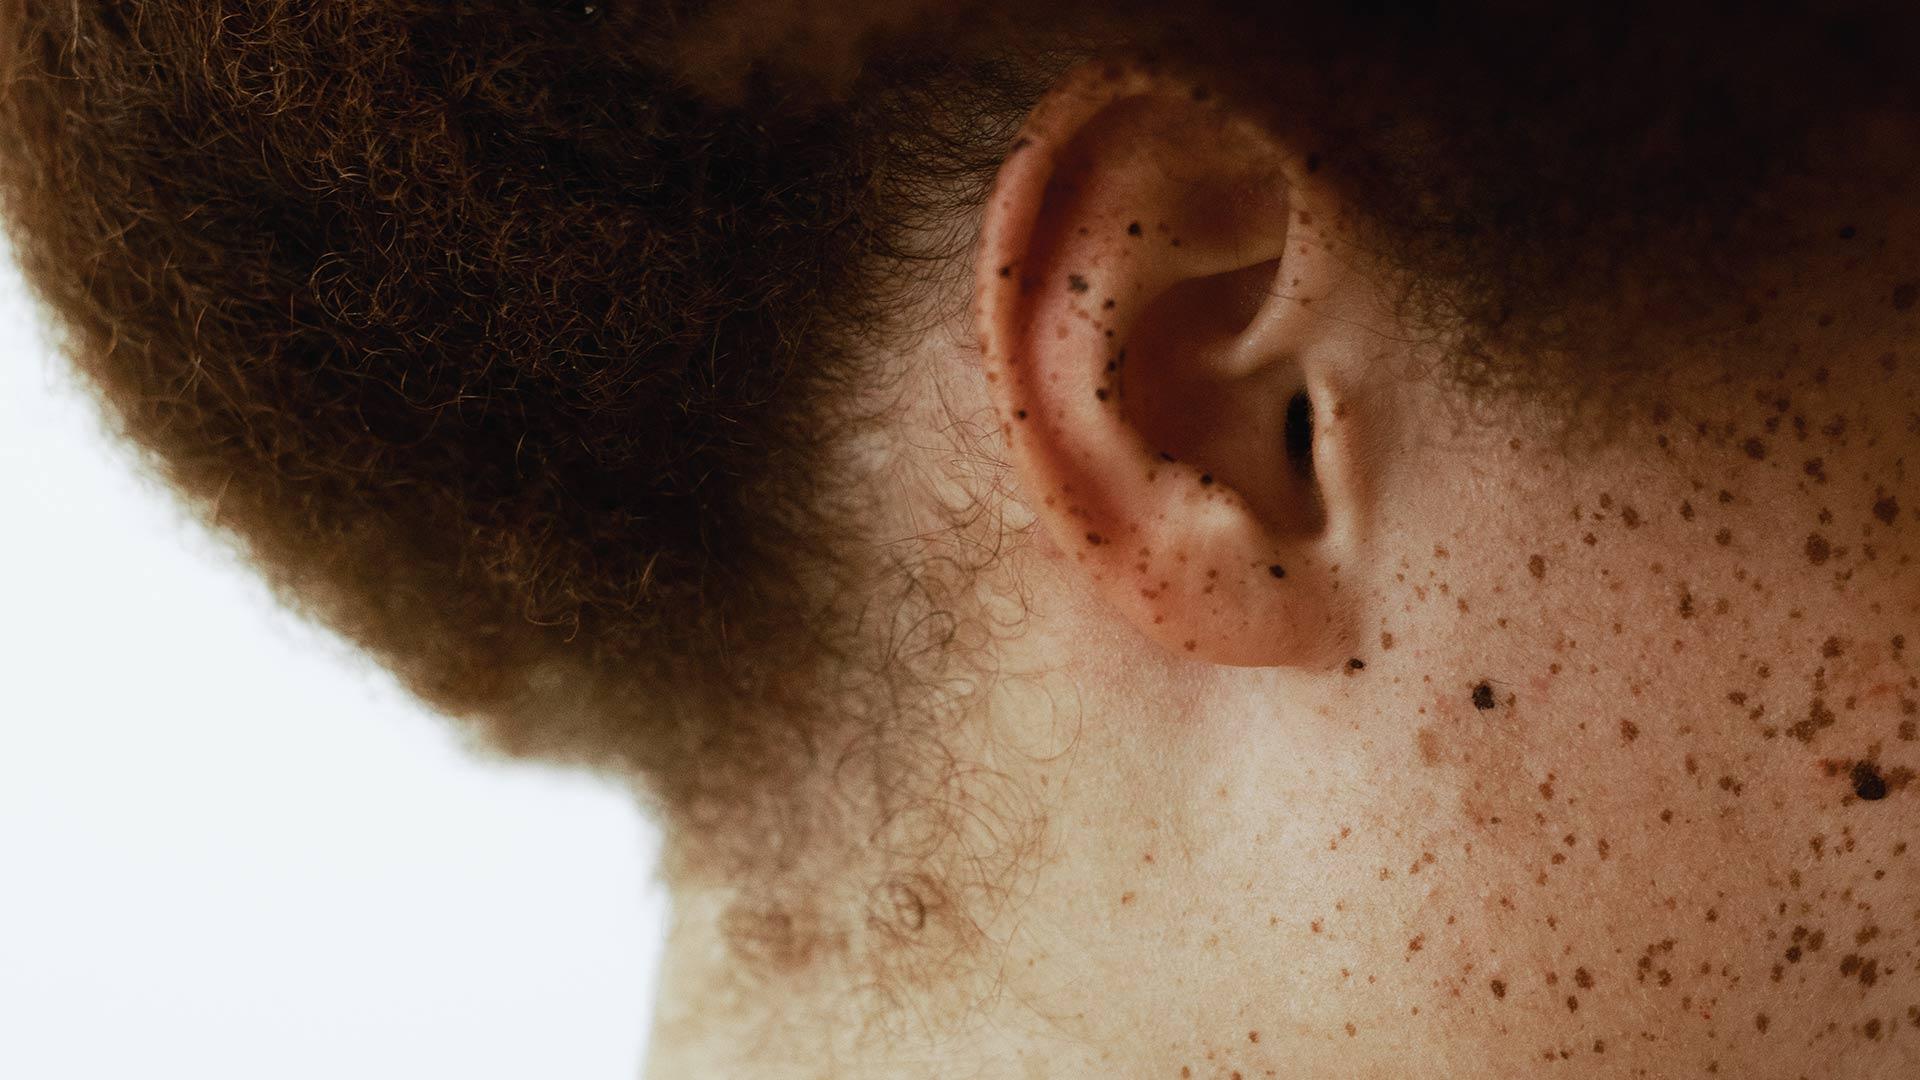 Partial image of the side of a womens face and ear with ginger afro hair and freckles